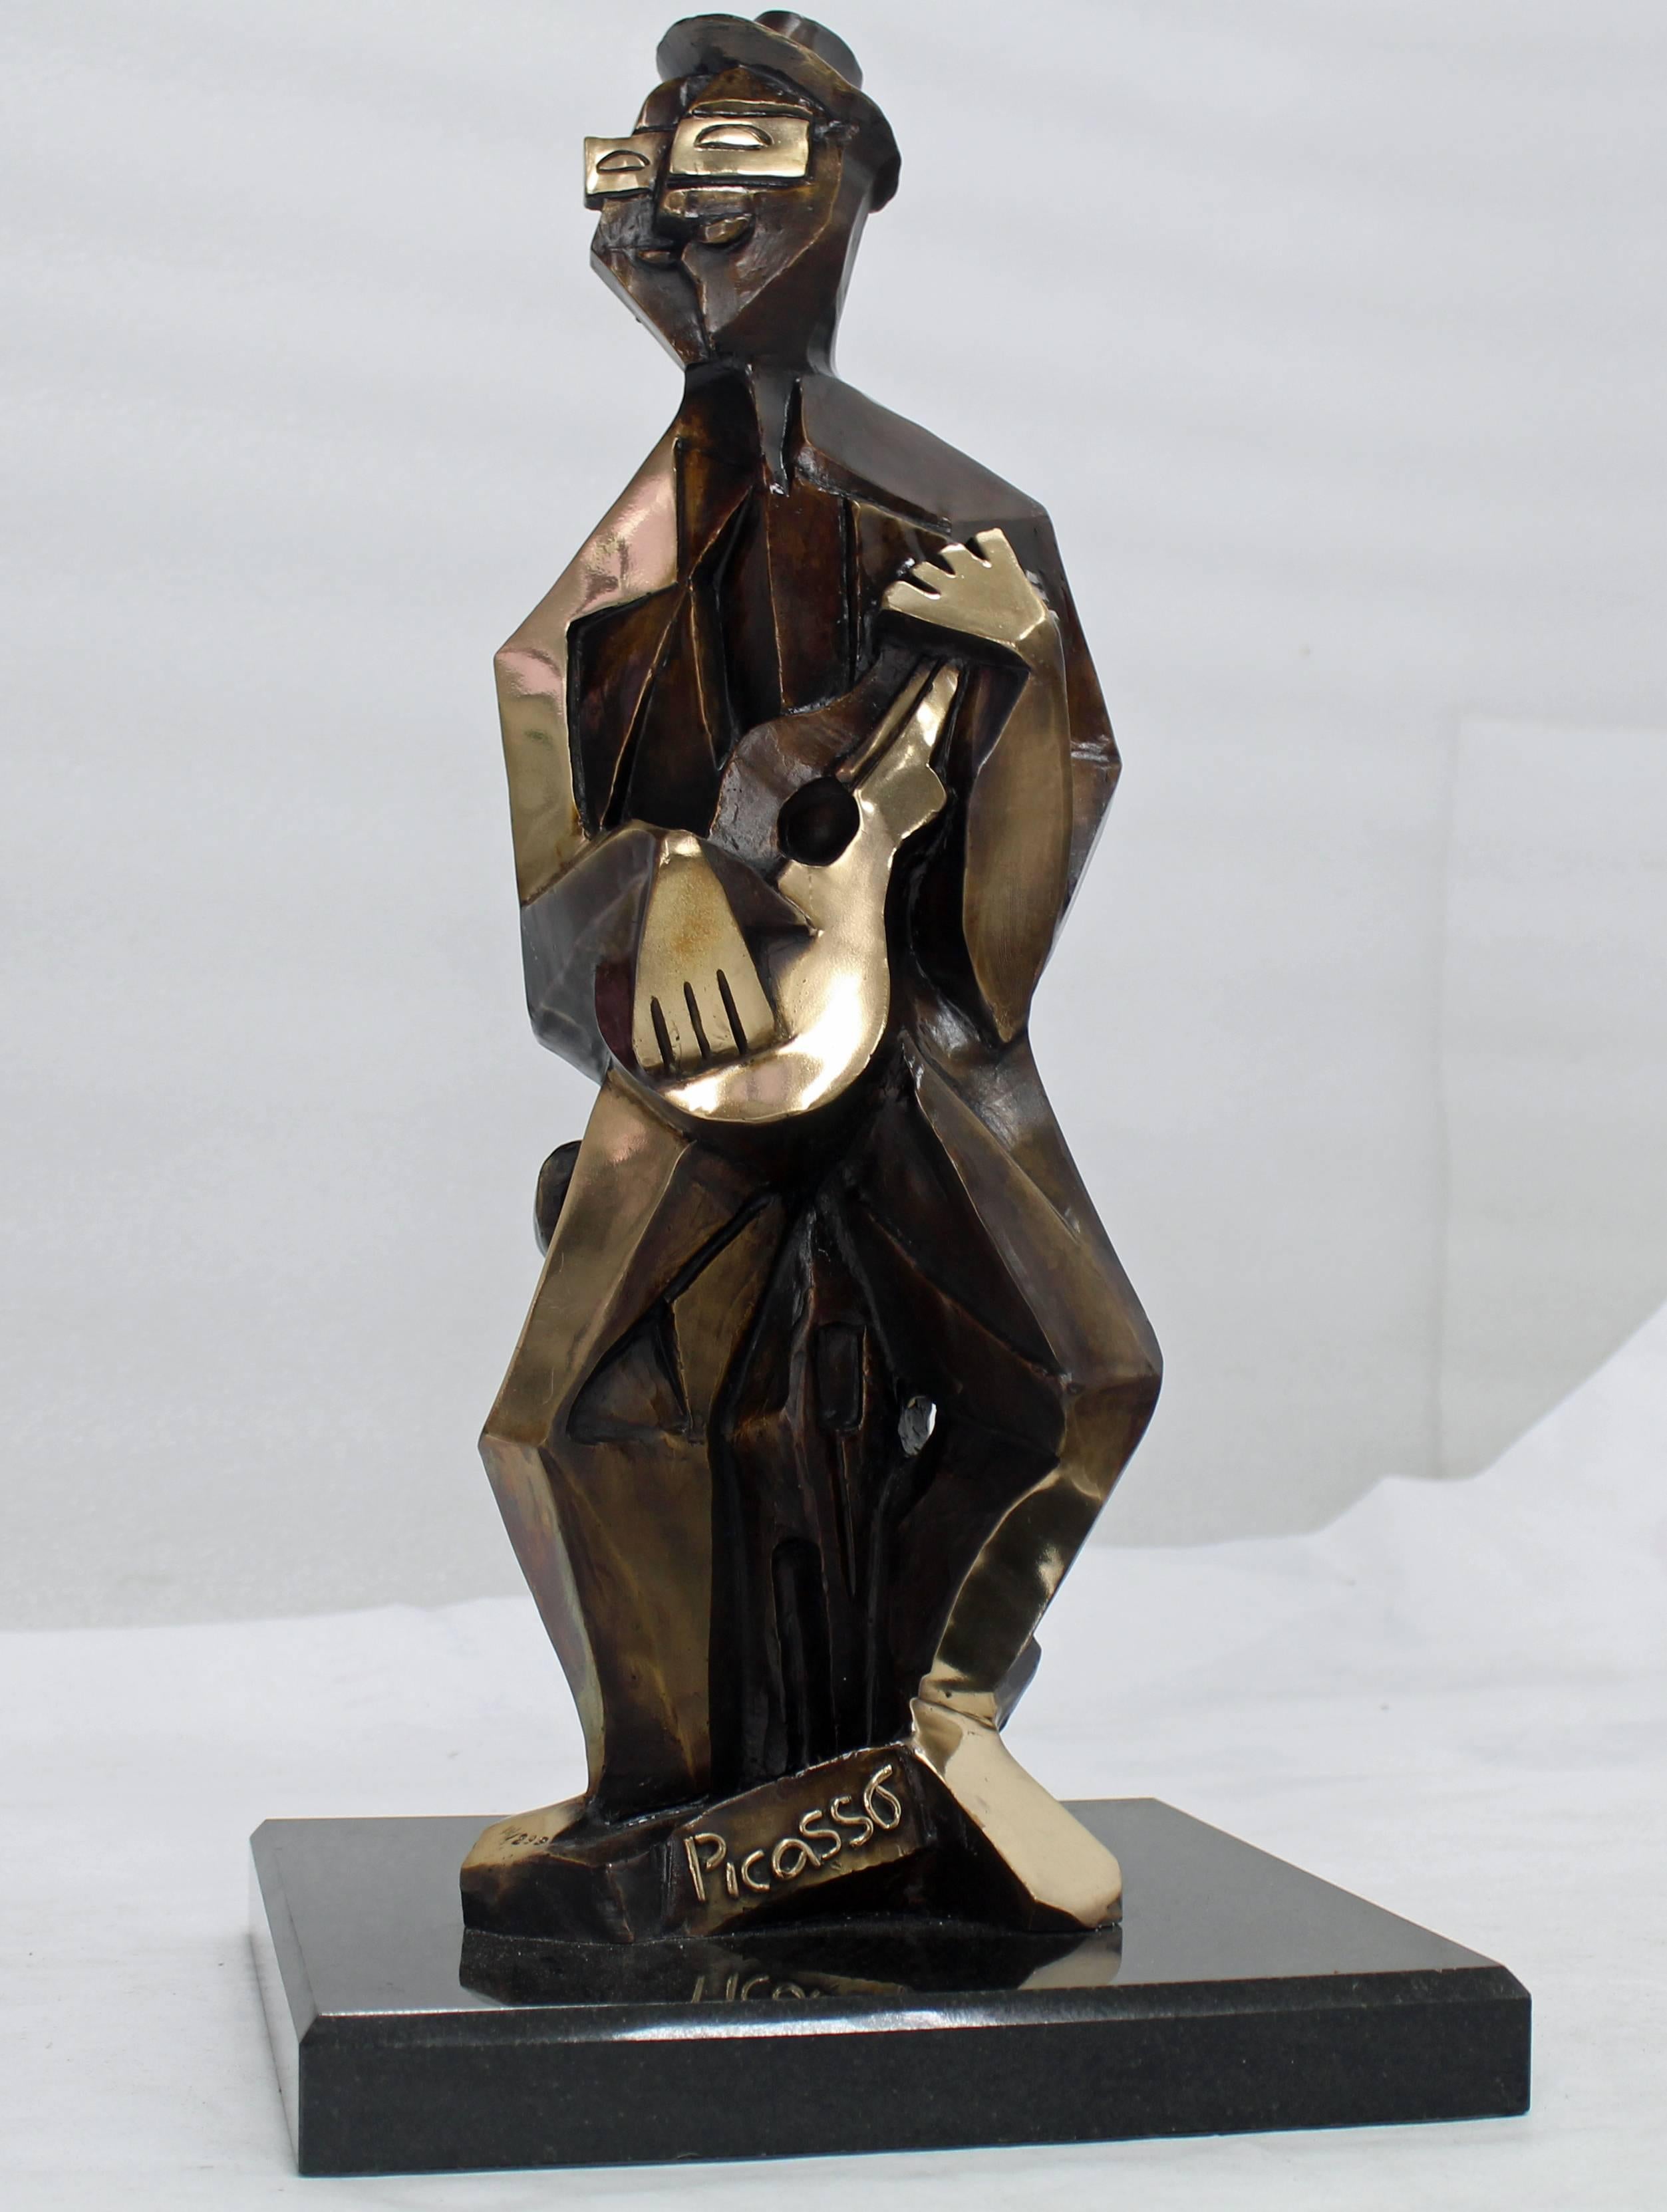 Very nice heavy solid bronze sculpture of a man playing guitar on square granite base. Measures: 19